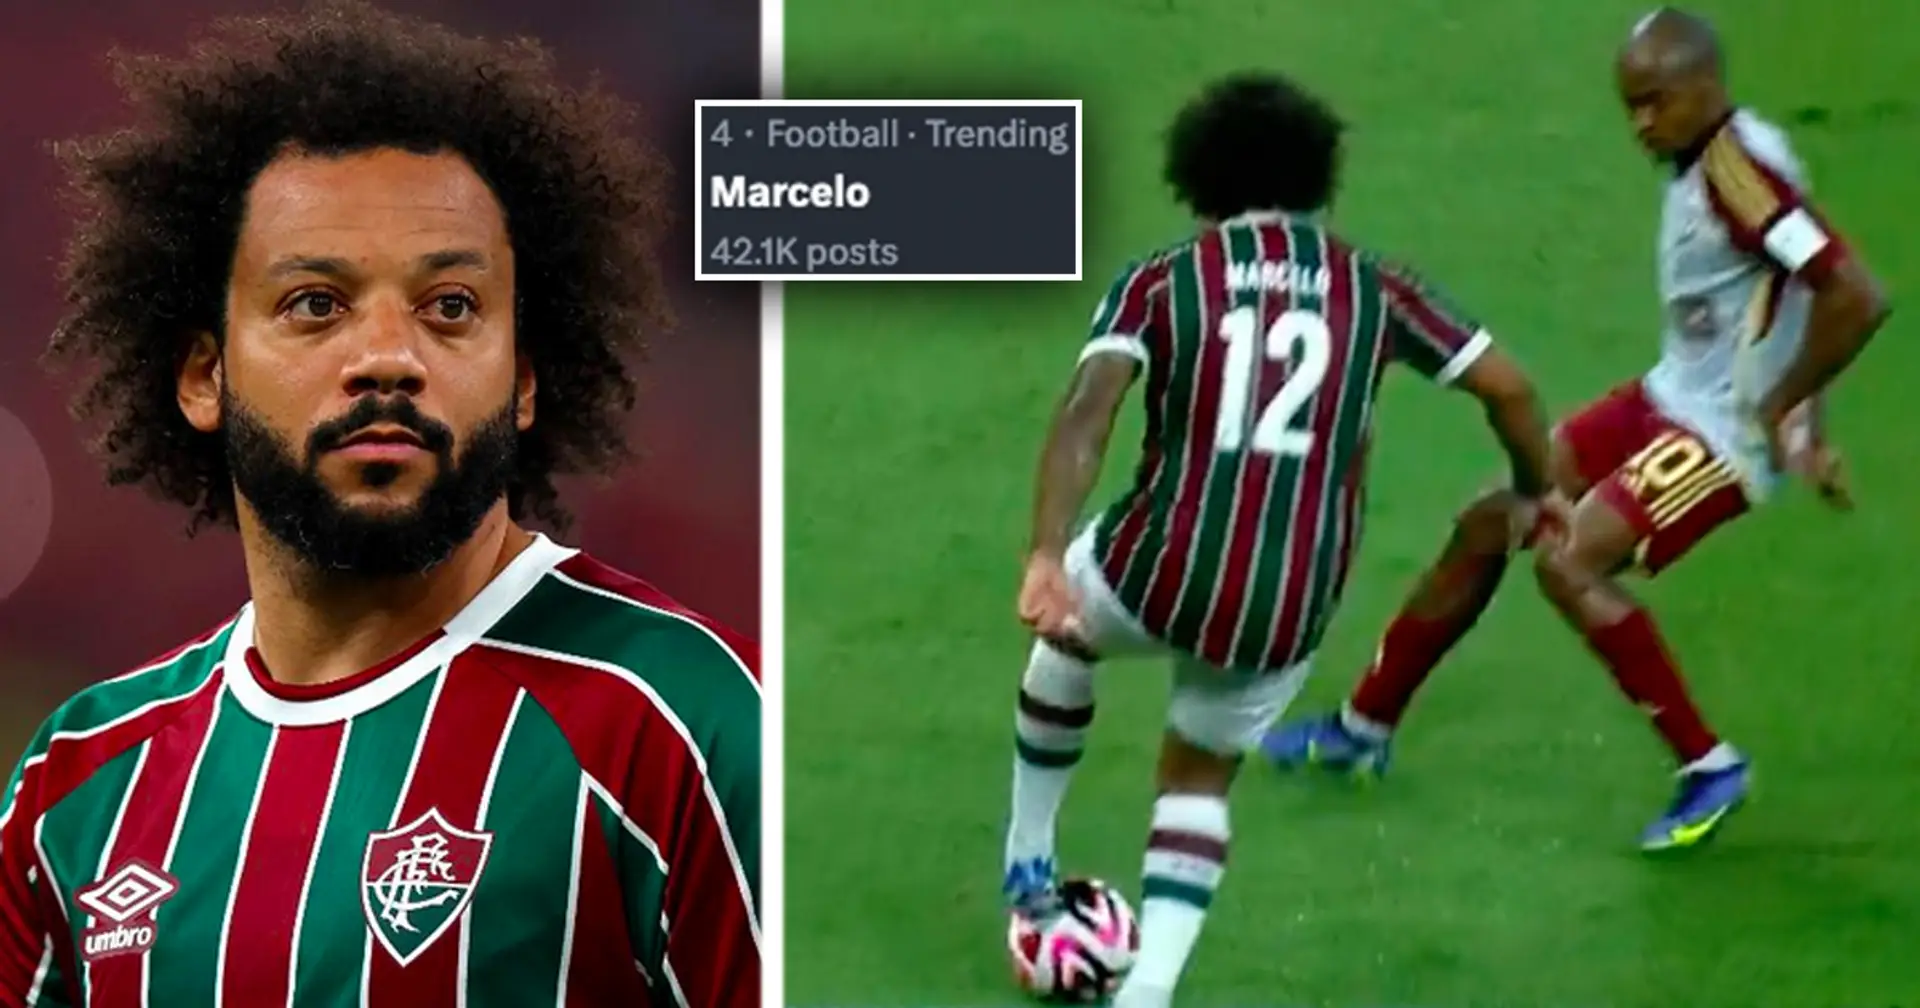 Marcelo trending worldwide for one thing he did at Club World Cup